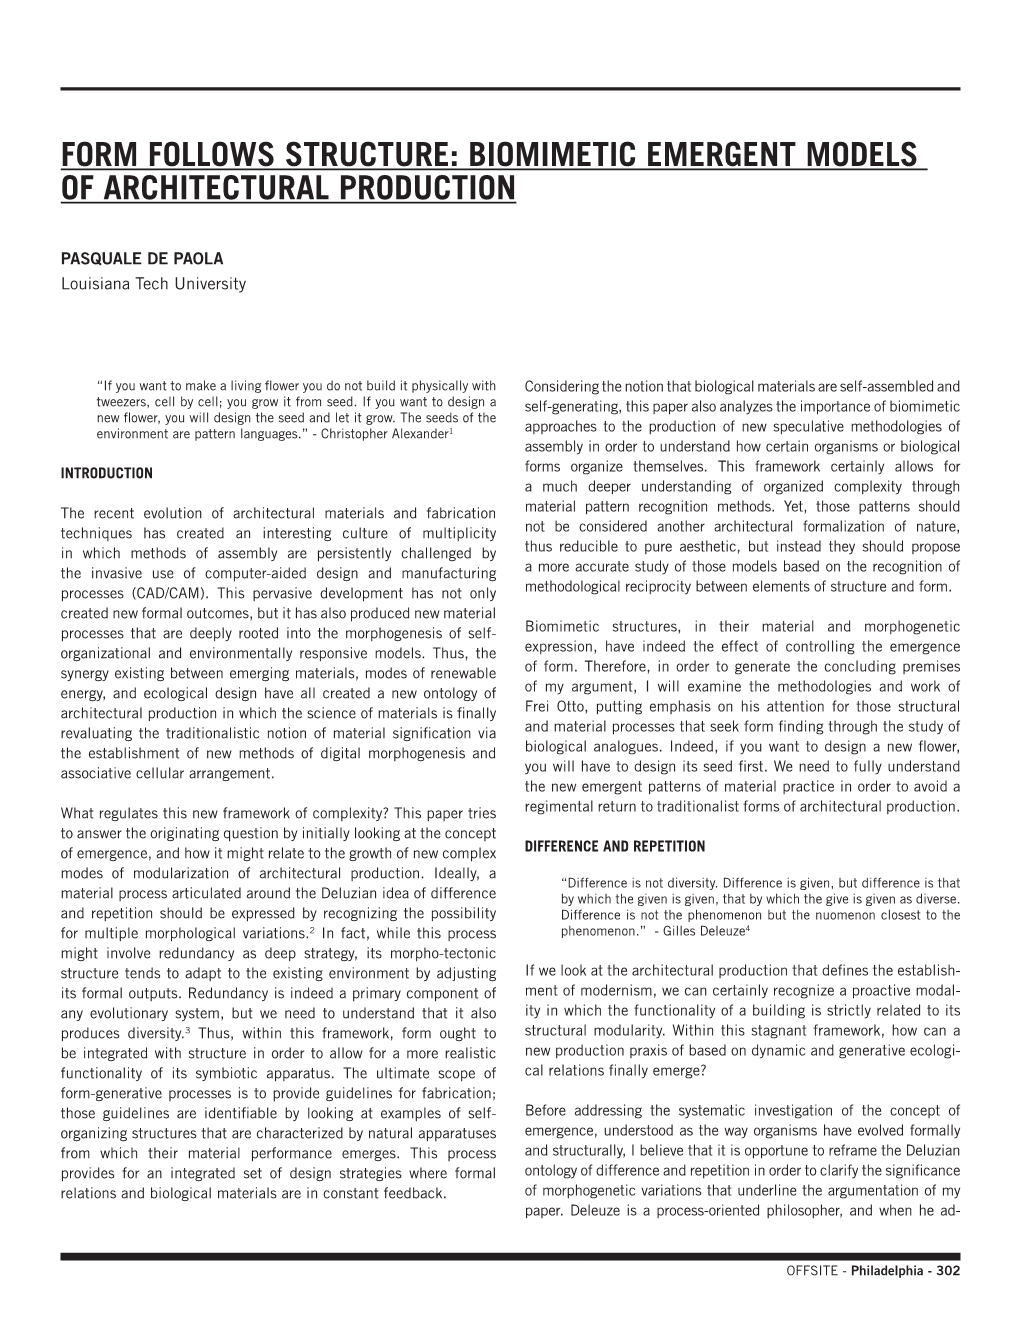 Form Follows Structure: Biomimetic Emergent Models of Architectural Production